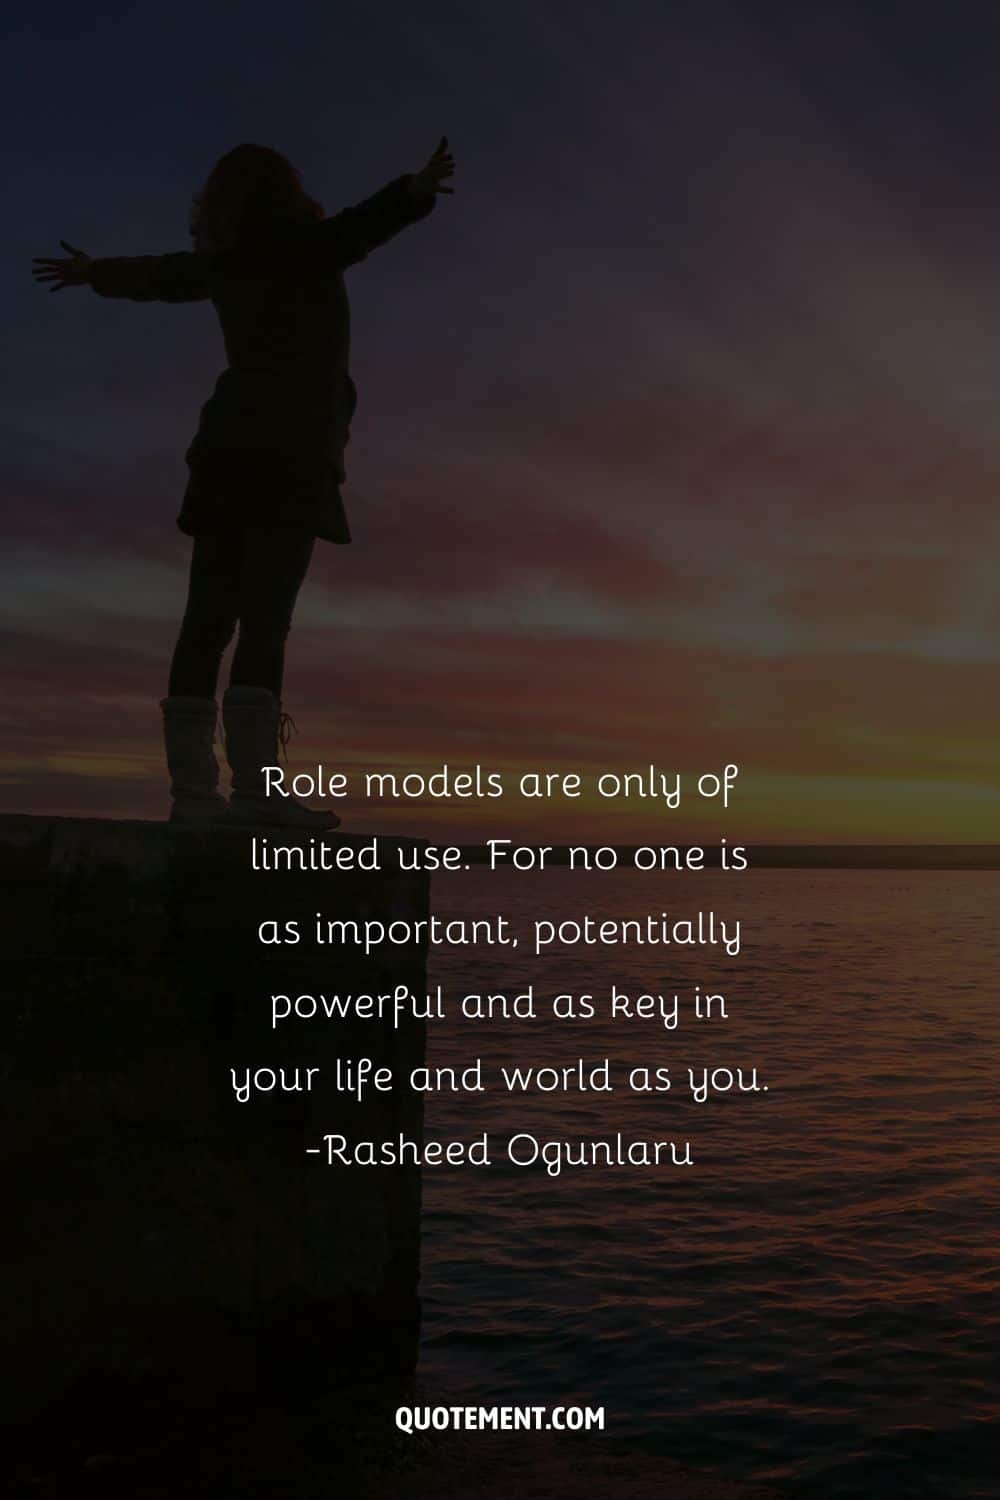 Role models are only of limited use